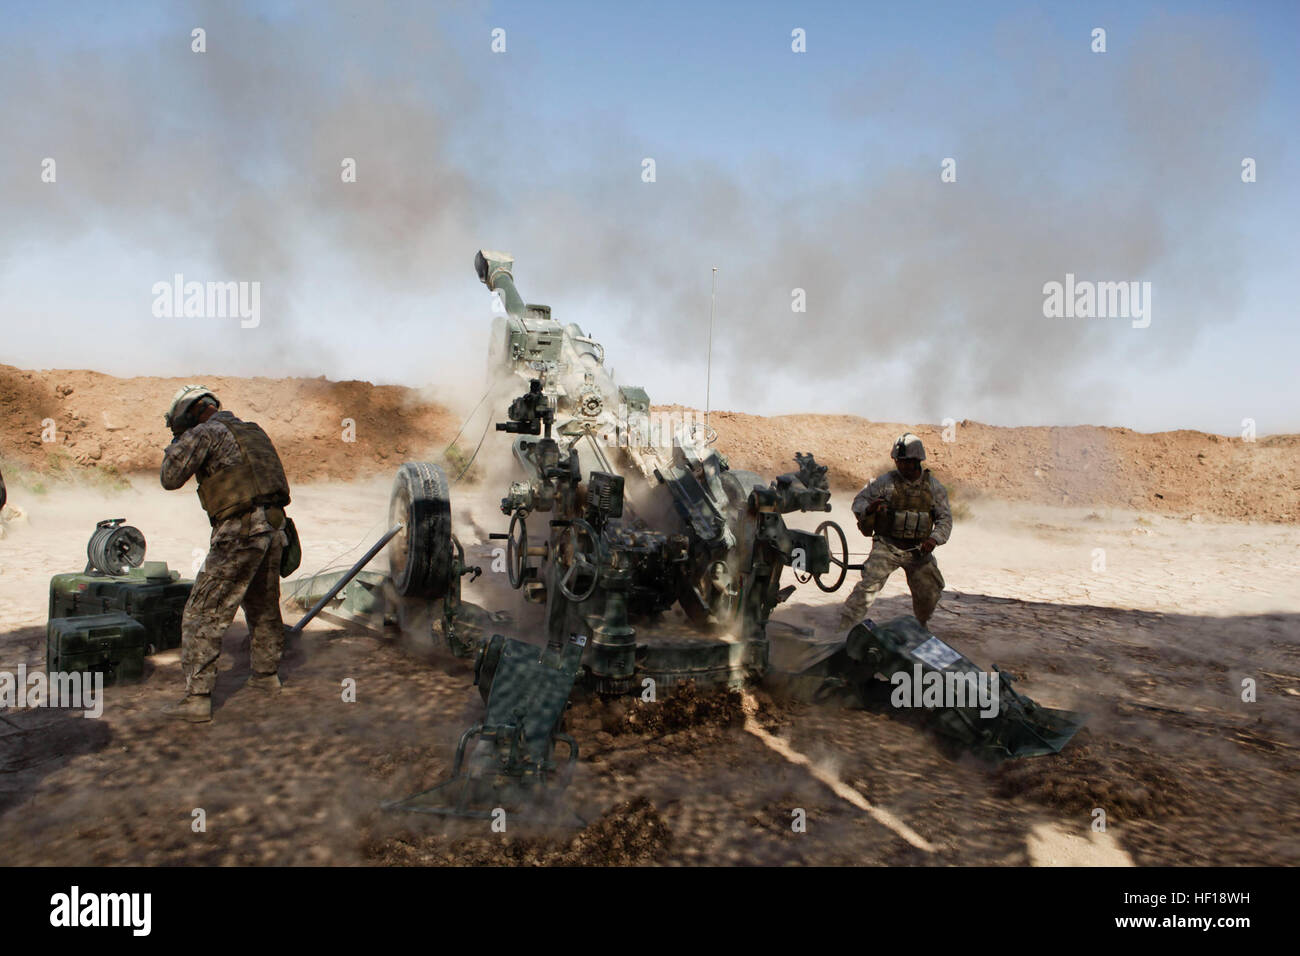 U.S. Marines with Battery G, 2nd Battalion, 11th Marine Regiment fire an M777 Lightweight 155mm Howitzer during Exercise DESERT SCIMITAR aboard Marine Corps Air-Ground Combat Center 29 Palms May 1, 2013. Exercise DESERT SCIMITAR was conducted to allow 1st Marine Division to sustain their ability to plan and execute command and control functions in both offensive and defensive scenarios. (U.S. Marine Corps photo by Lance Cpl. Sean Searfus, 1st Marine Division/Released) Exercise DESERT SCIMITAR 130501-M-VH365-013 Stock Photo